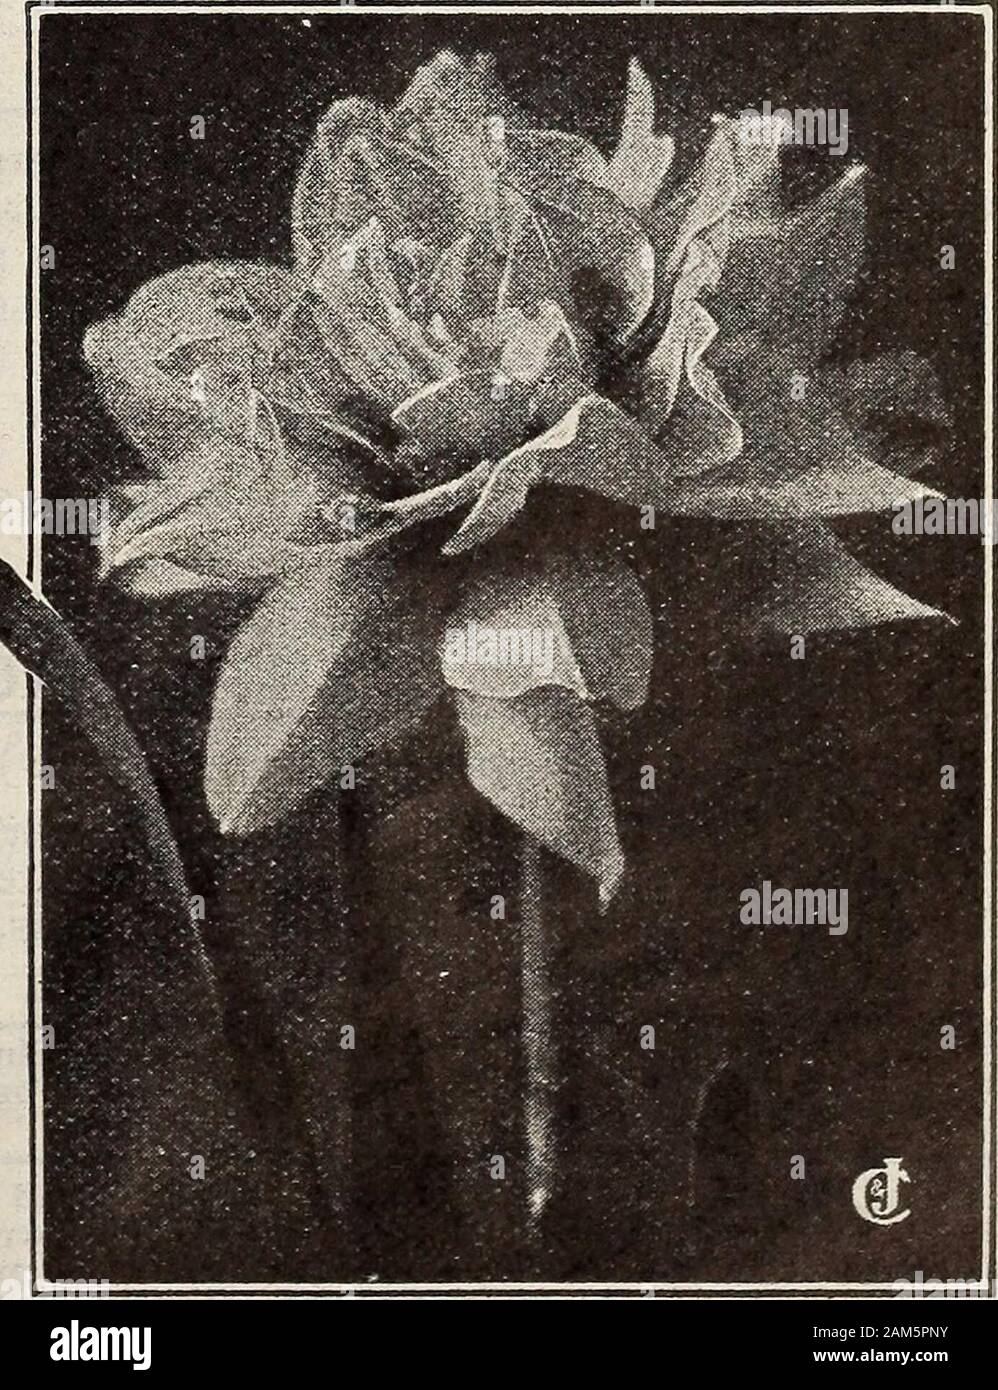 New floral guide : autumn 1913 . theDaffodils that come before the sWaltaW dares Double Narcissi, or Improved Daffodils Delivered free in the U. S. A. at these prices Hundred rate is 75 times single price, prepaid Each 3 for Doz. Alba plena odorata. The Double White PoetsNarcissus. Double, snow-white gardenia-like flowers, delightfully sweet. cts. 03 0404 0704 cts.08 IQIO 18IO cts. 25 3535 70 35 Incomparabilis fl. pi. Butter and Eggs.Large, handsome flowers, as double as roses;bright canary-yellow, with rich orangecenter Grange Phoenix. Eggs and Bacon. Outerpetals nearly pure white, center mix Stock Photo